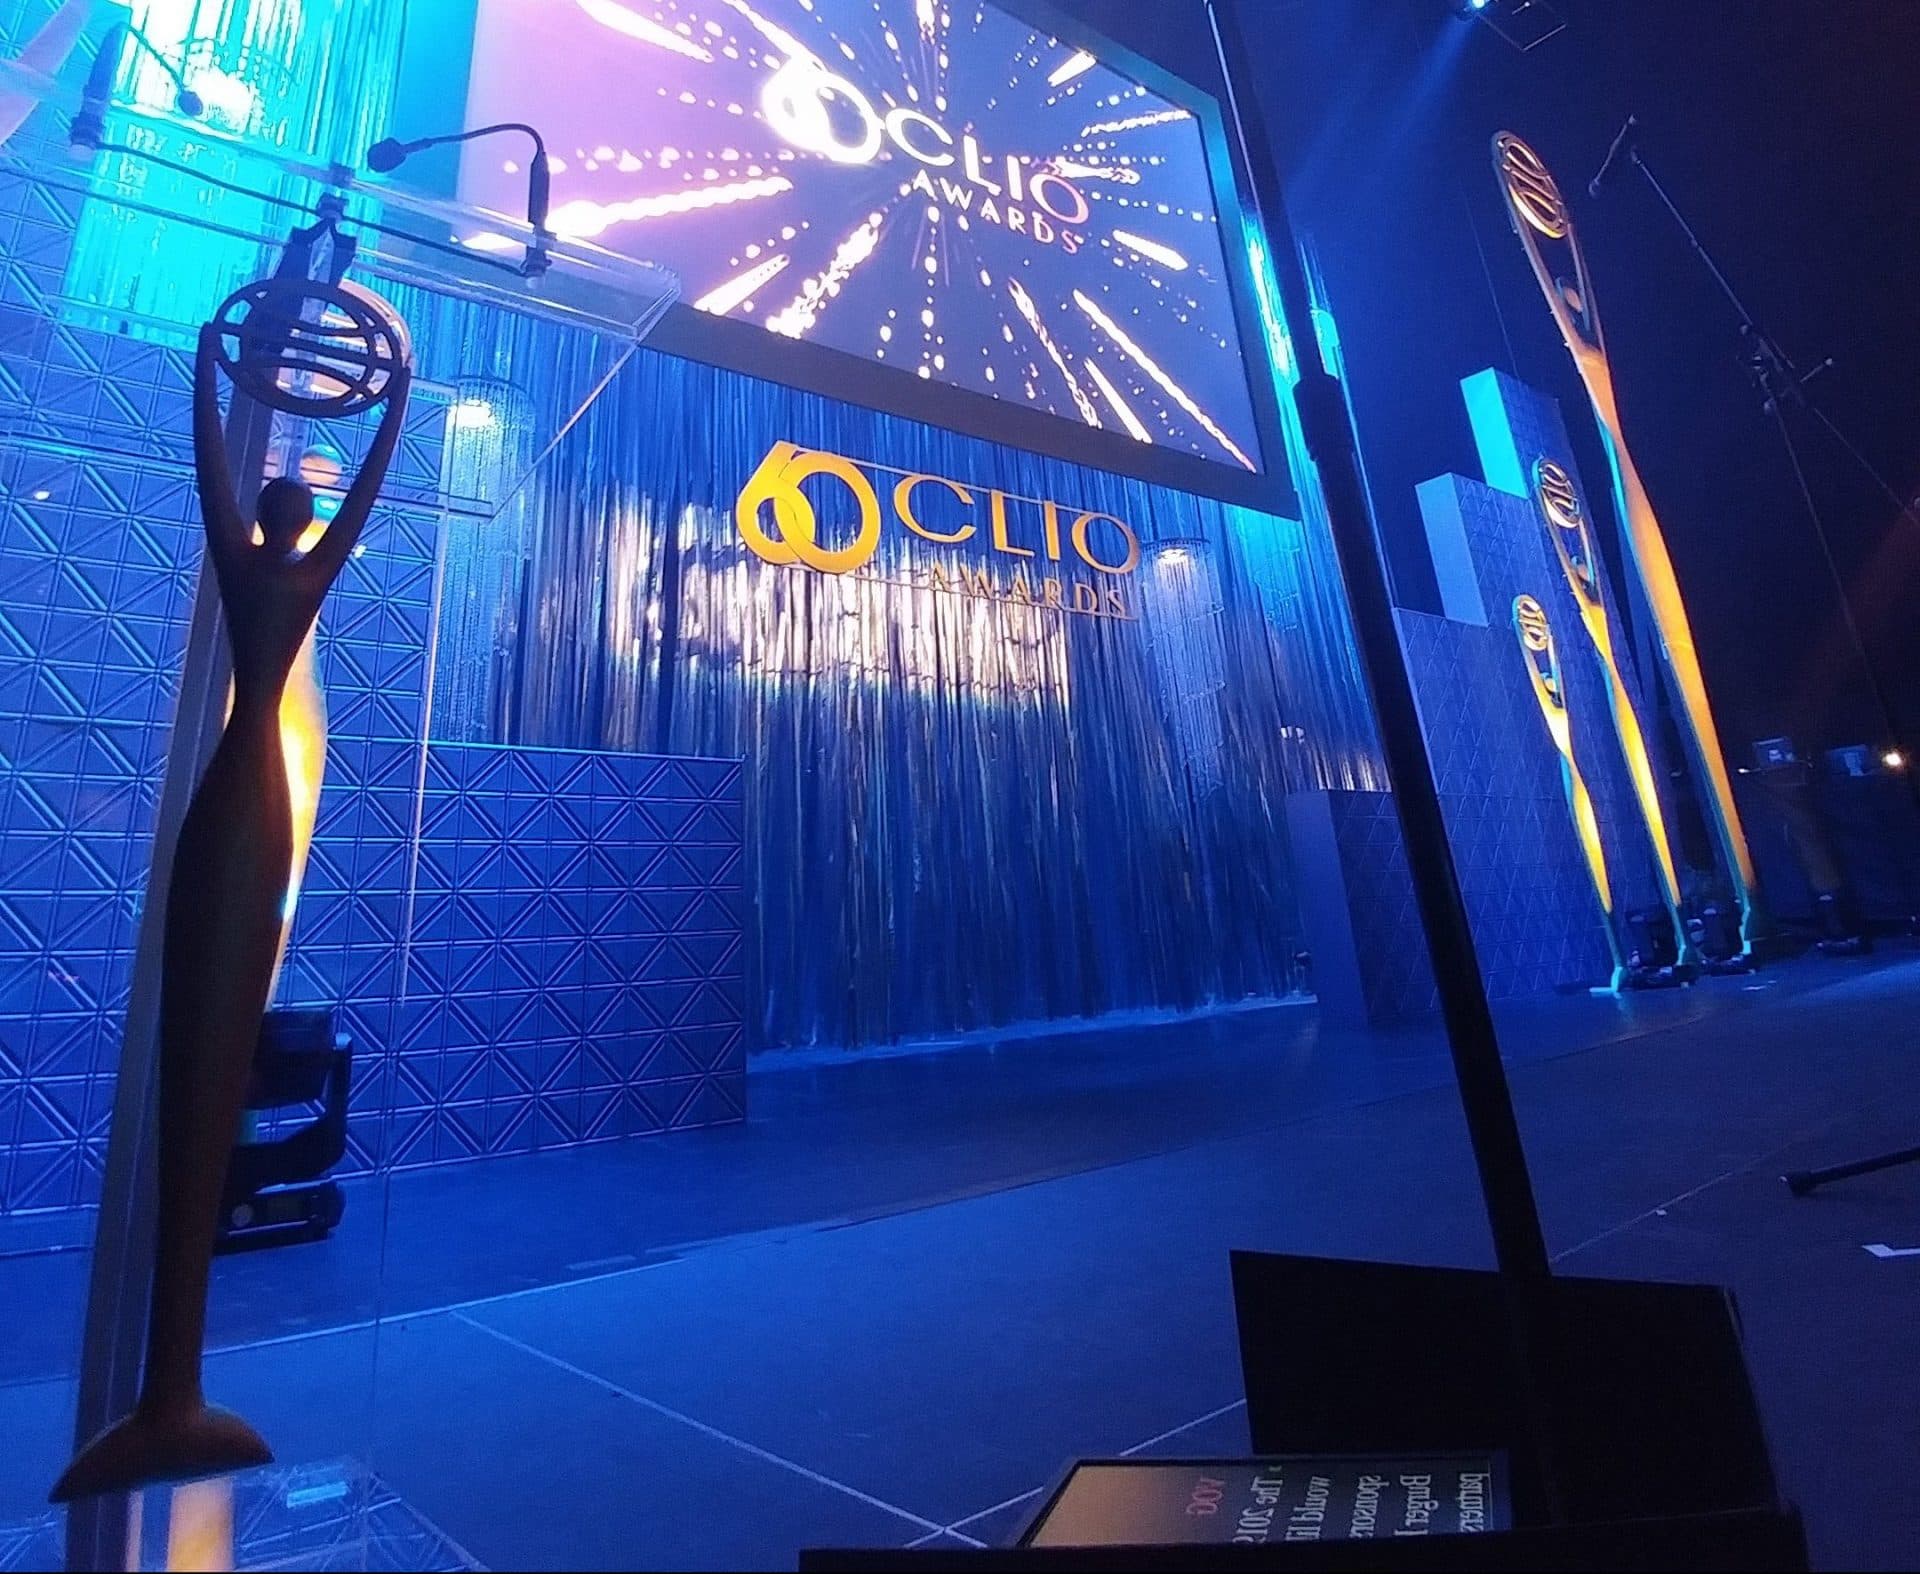 Weber Shandwick Has Strongest Year Ever at 2019 Clio Awards